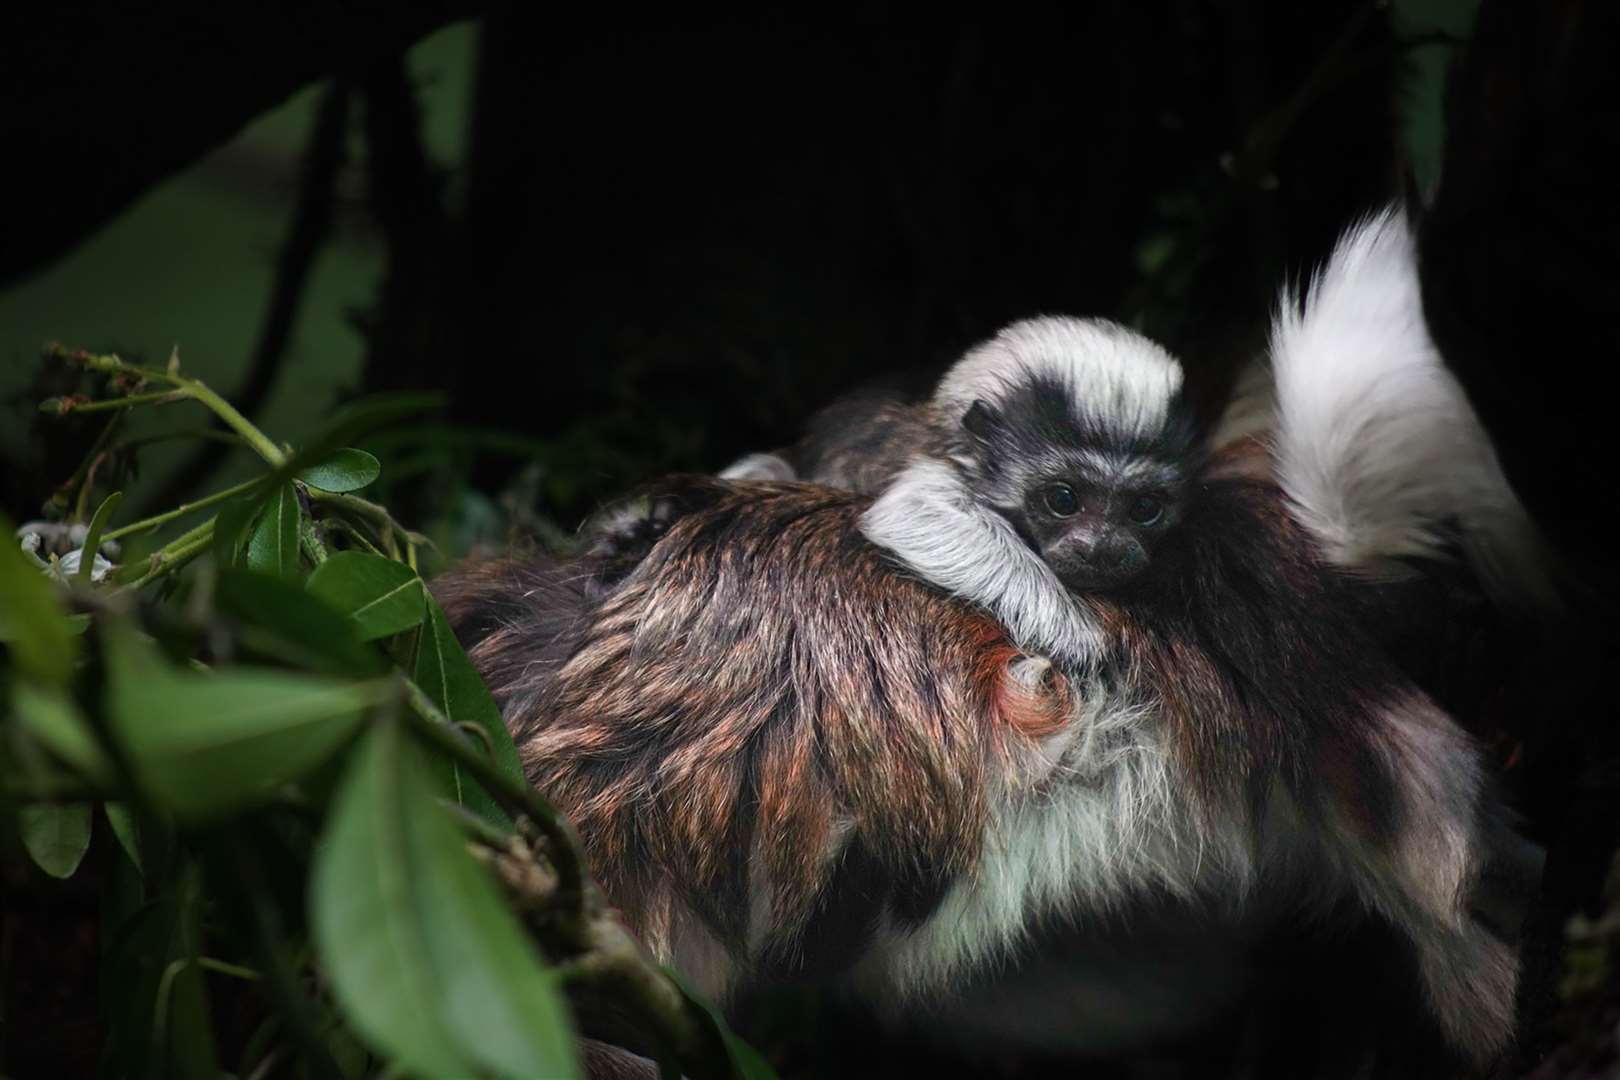 The tamarin will cling to its parents or siblings until it becomes fully independent at around five months old (Marwell Zoo/PA)